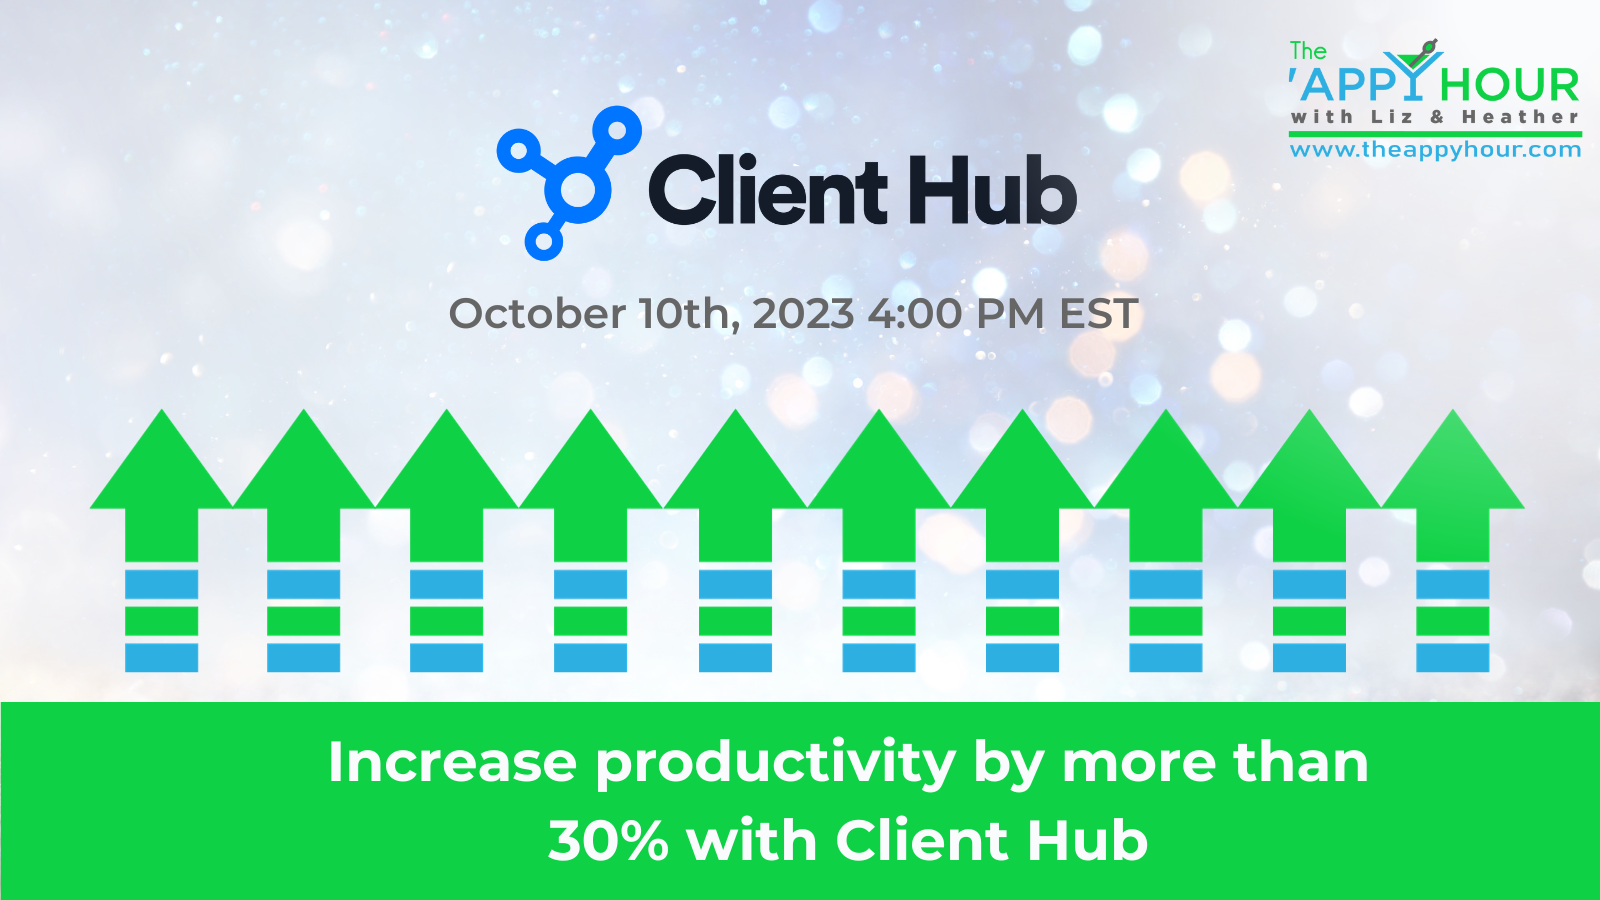 Increase Productivity by More Than 30% with Client Hub